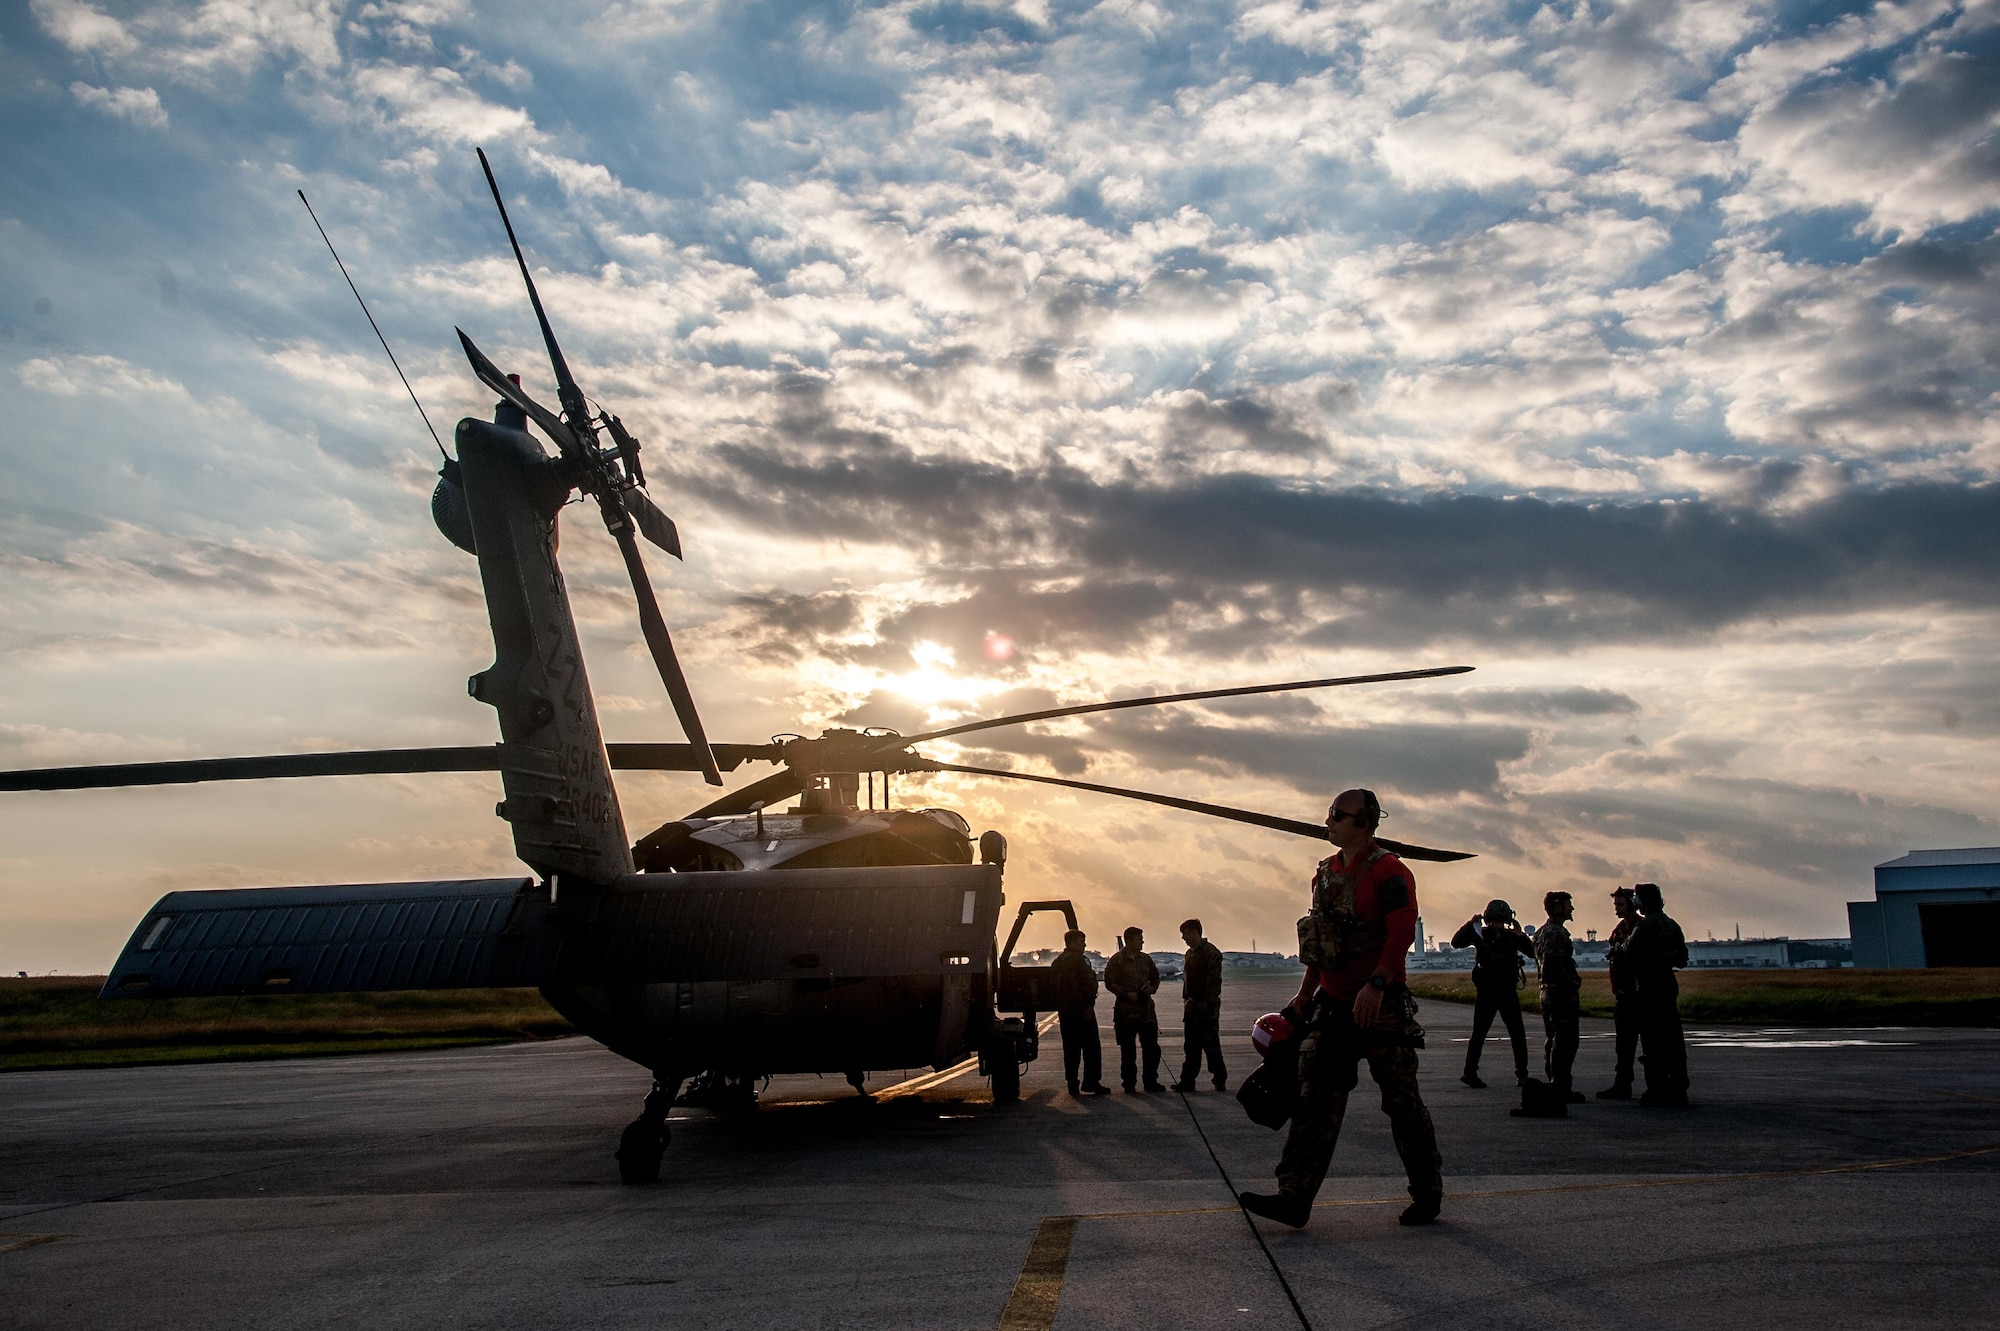 U.S. Air Force Airmen prepare to board an HH-60G Pave Hawk helicopter assigned to the 33rd Rescue Squadron during annual exercise Keen Sword Nov. 4, 2016, on Kadena Air Base, Japan. Keen Sword is a regularly scheduled exercise which strengthens Japan-U.S. military interoperability and meets mutual defense objectives. Japan-U.S. military operations and exercises increase readiness to respond to varied crisis situations in the region. (U.S. Air Force photo by Senior Airman John Linzmeier)